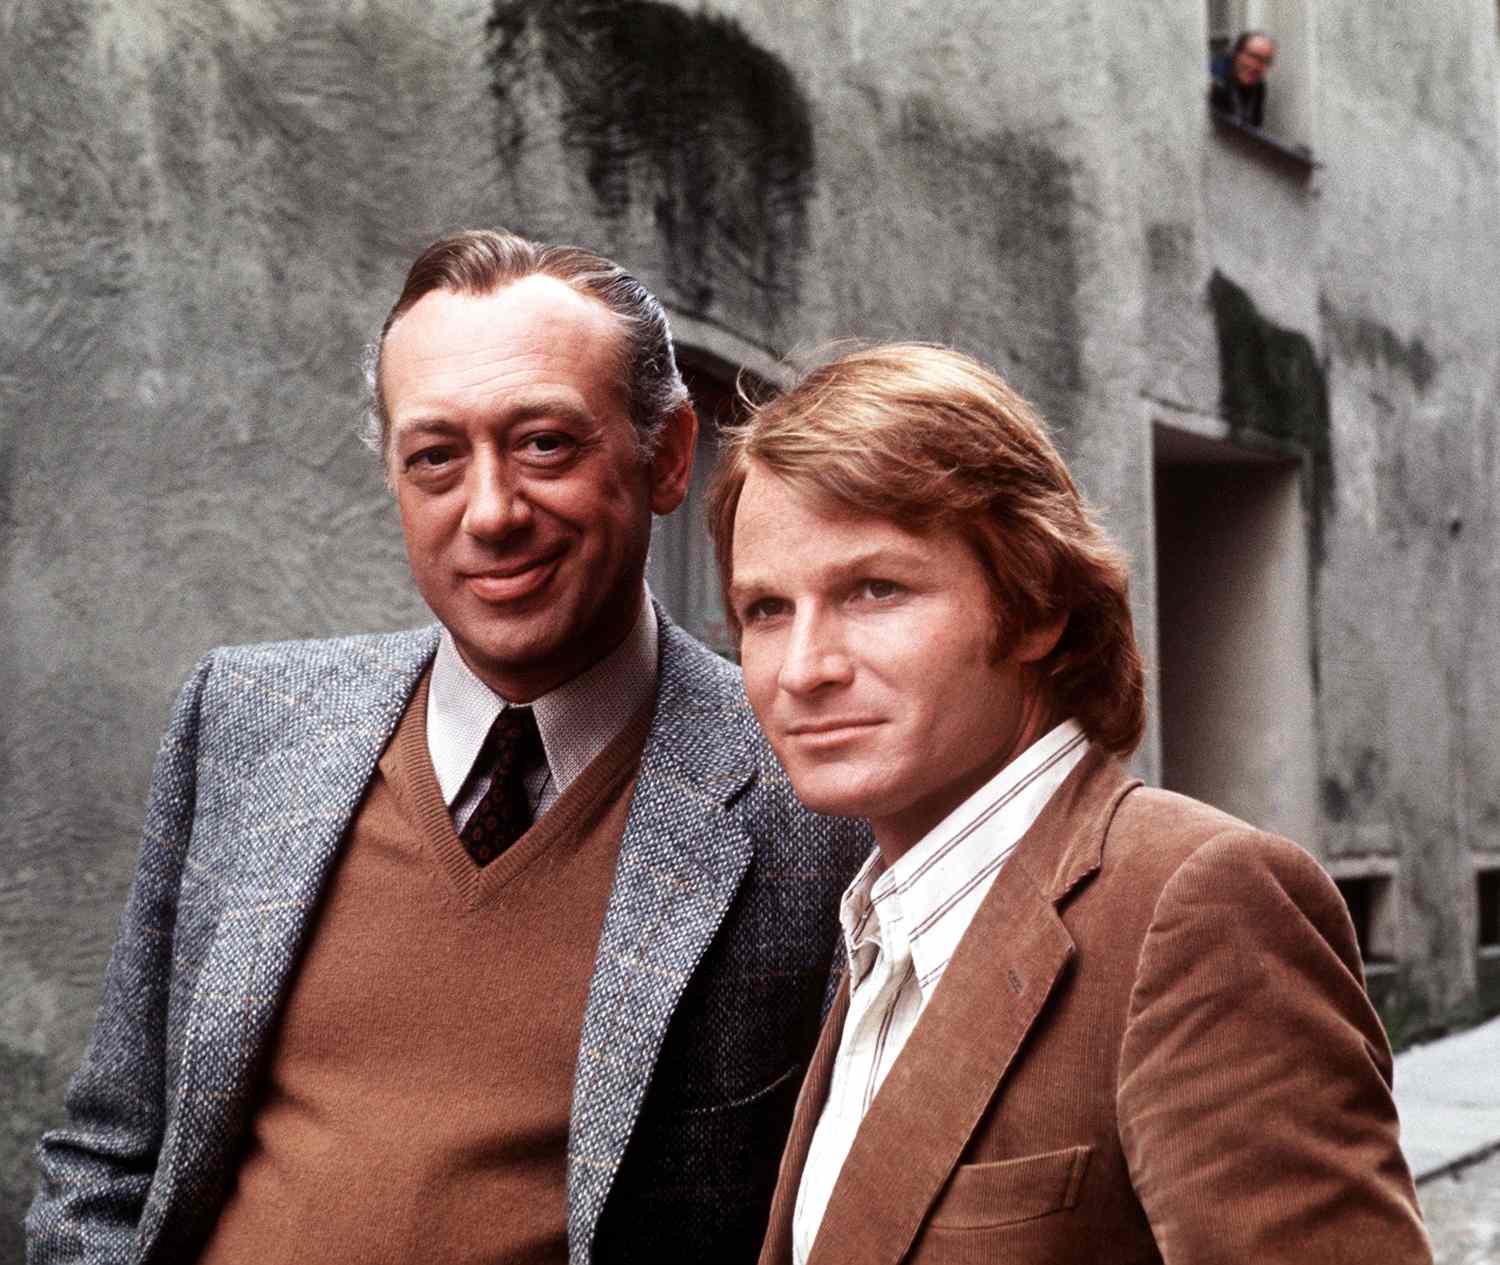 German actors Horst Tappert (l) and Fritz Wepper (r), both acting in the crime series "Derrick", in August 1973.